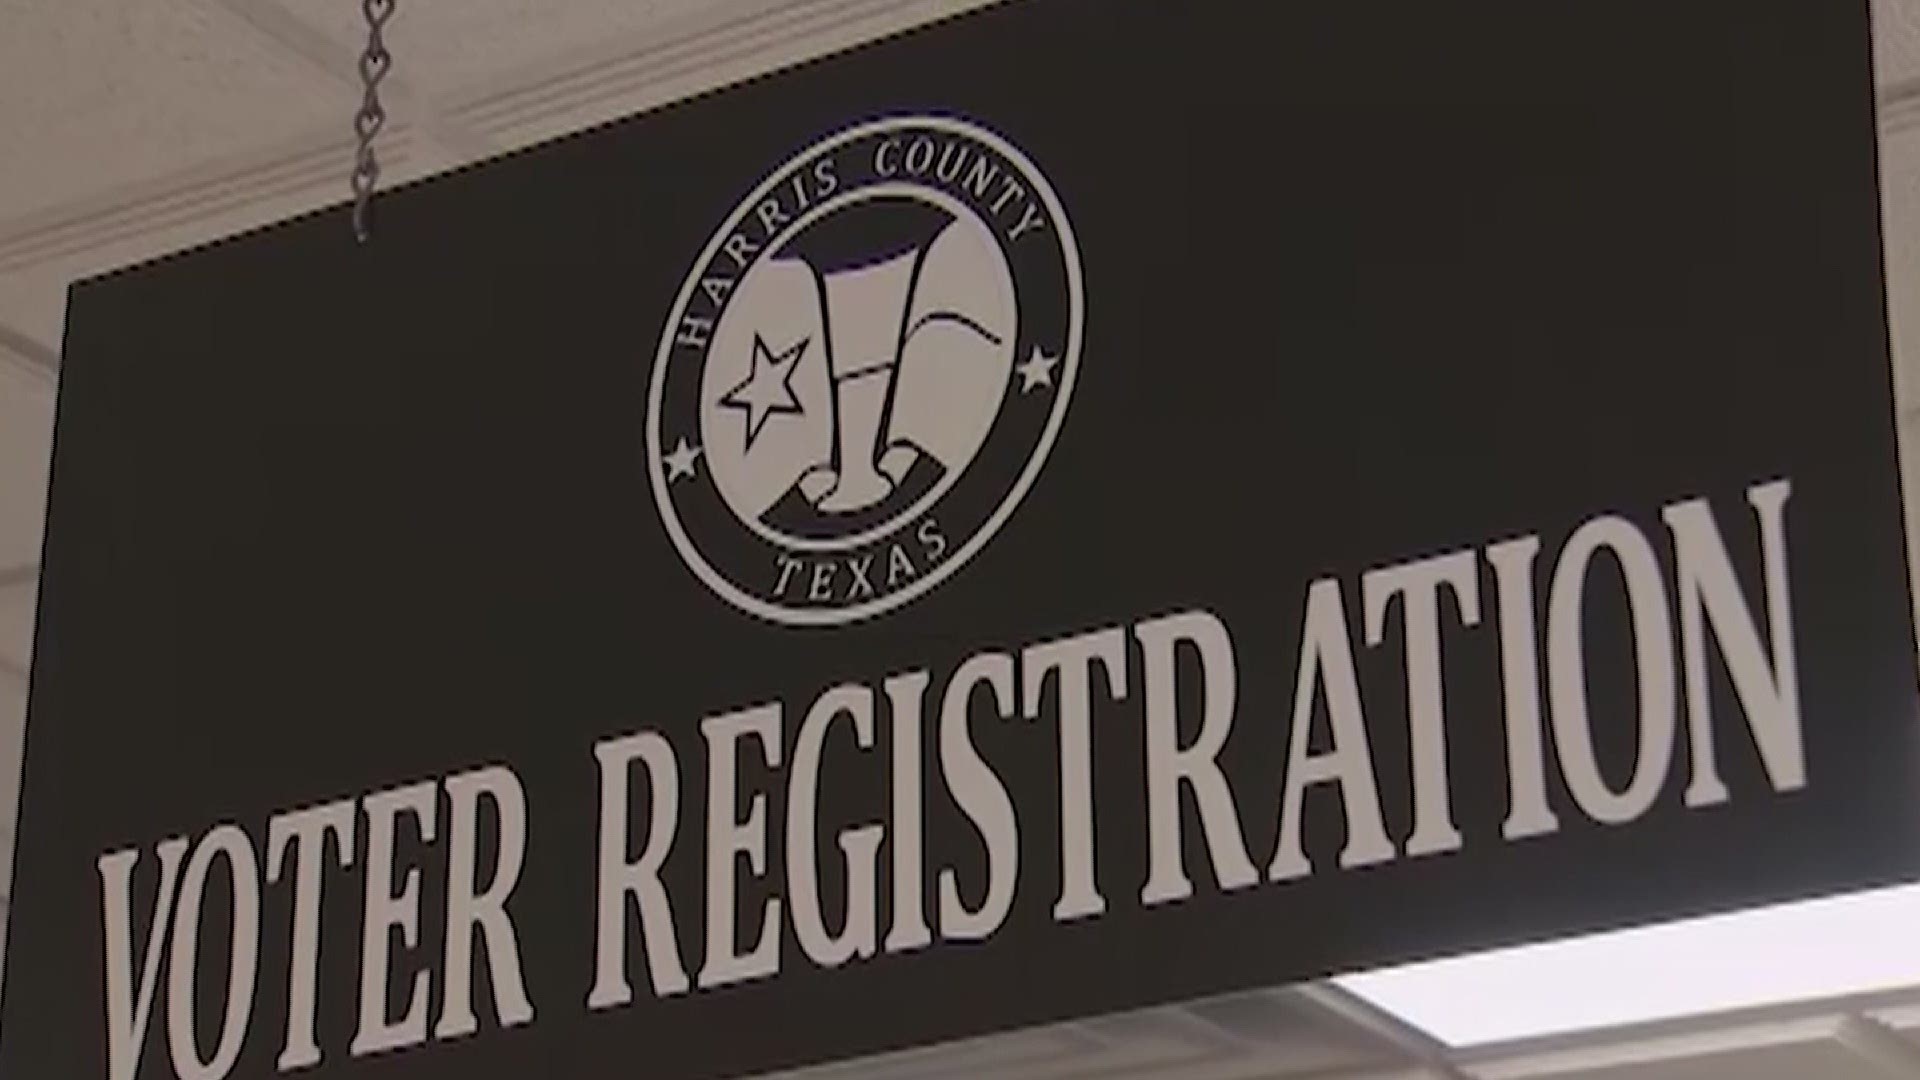 Monday, Oct. 5 was the last day to register to vote in Texas. Many first-time voters didn't take any chances of missing the big day and had already registered.